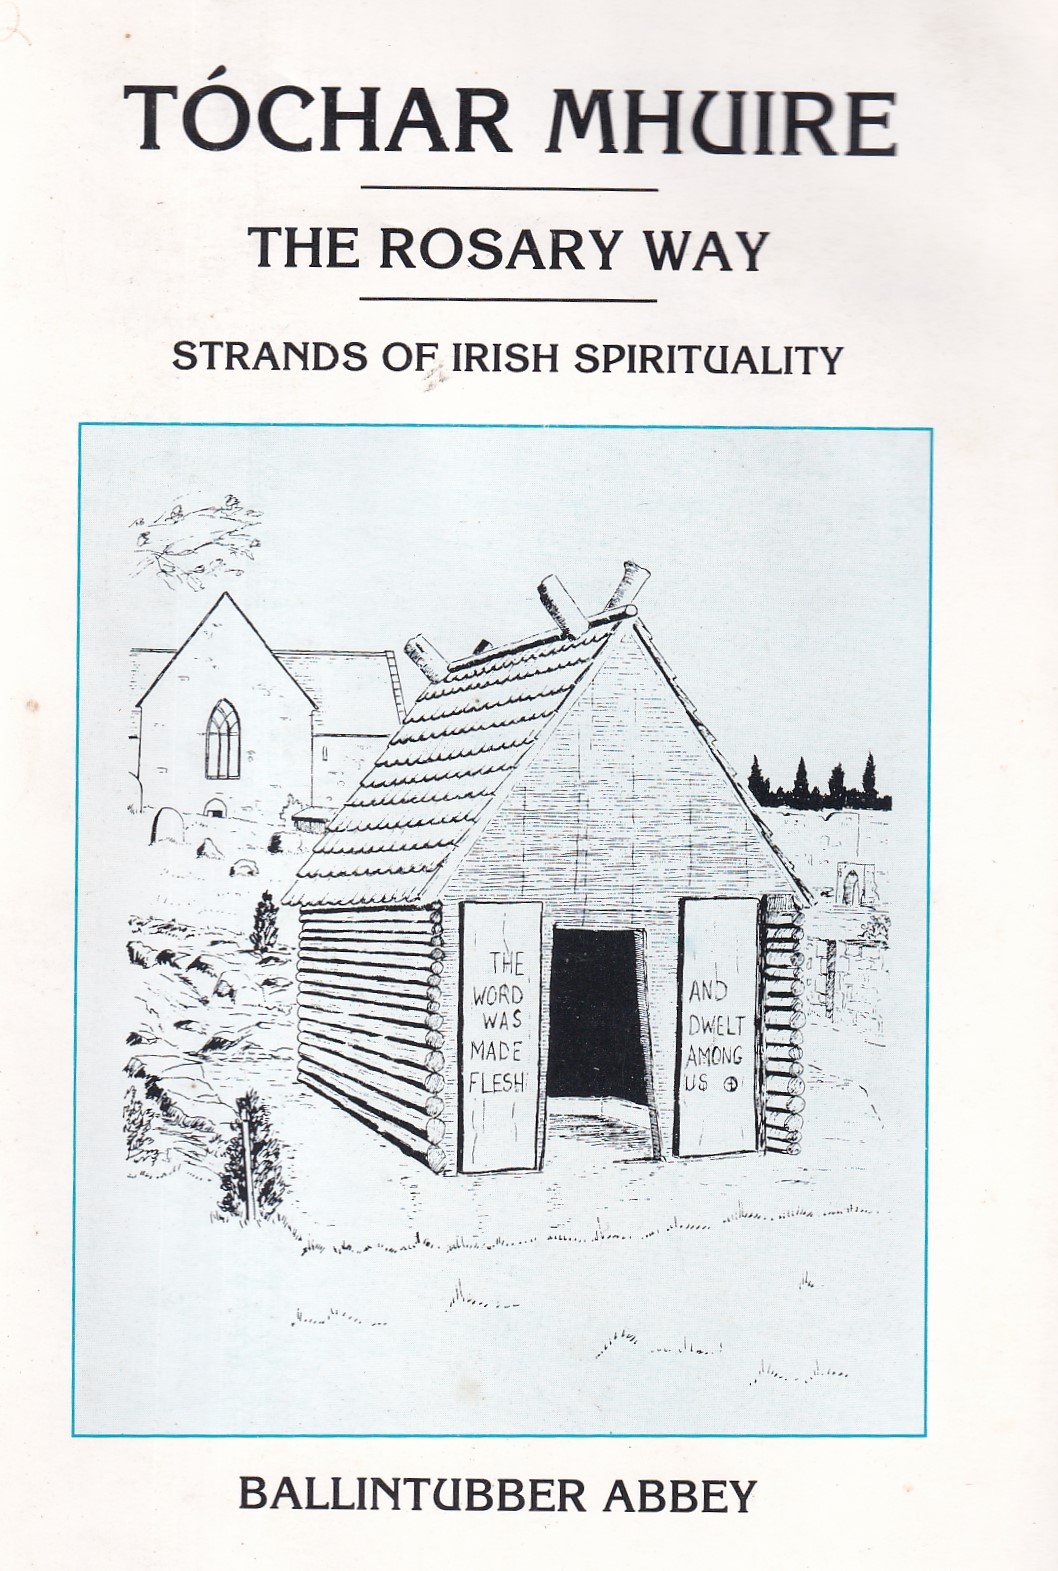 Tochar Mhuire. The Rosary Way – Strands of Irish Spirituality (Pamphlet) by Ballintubber Abbey